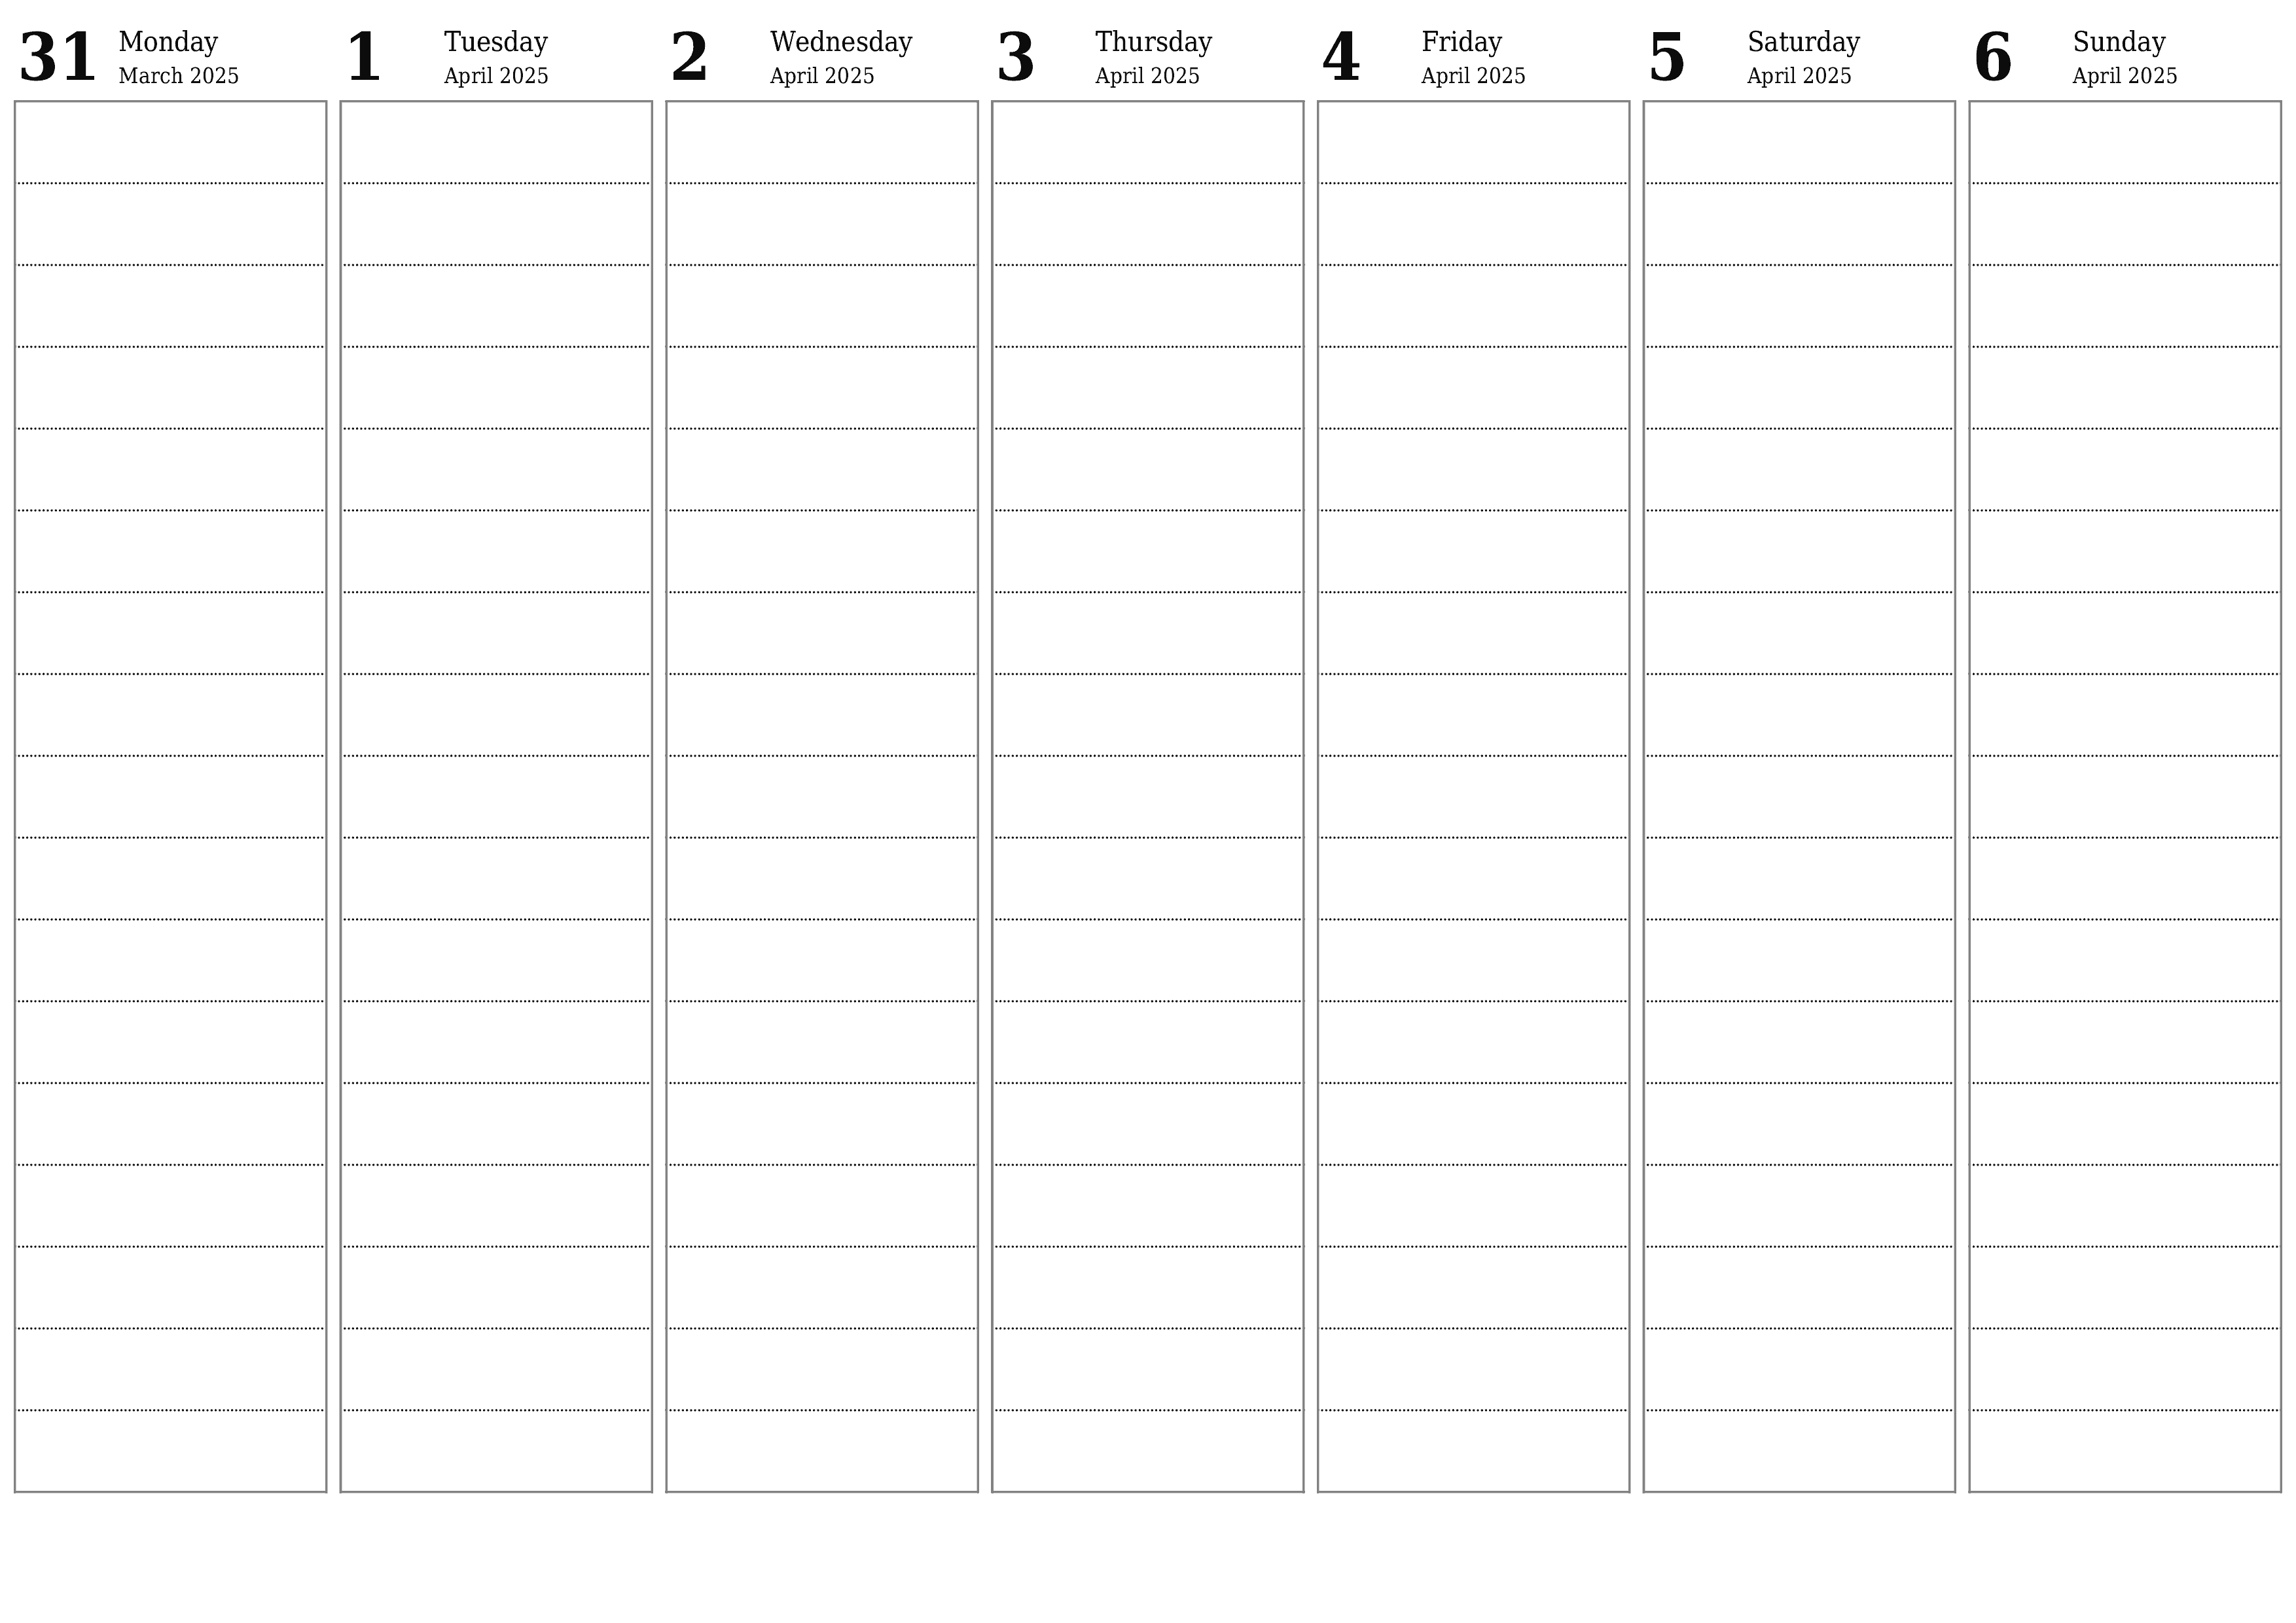 Blank weekly printable calendar and planner for week April 2025 with notes, save and print to PDF PNG English